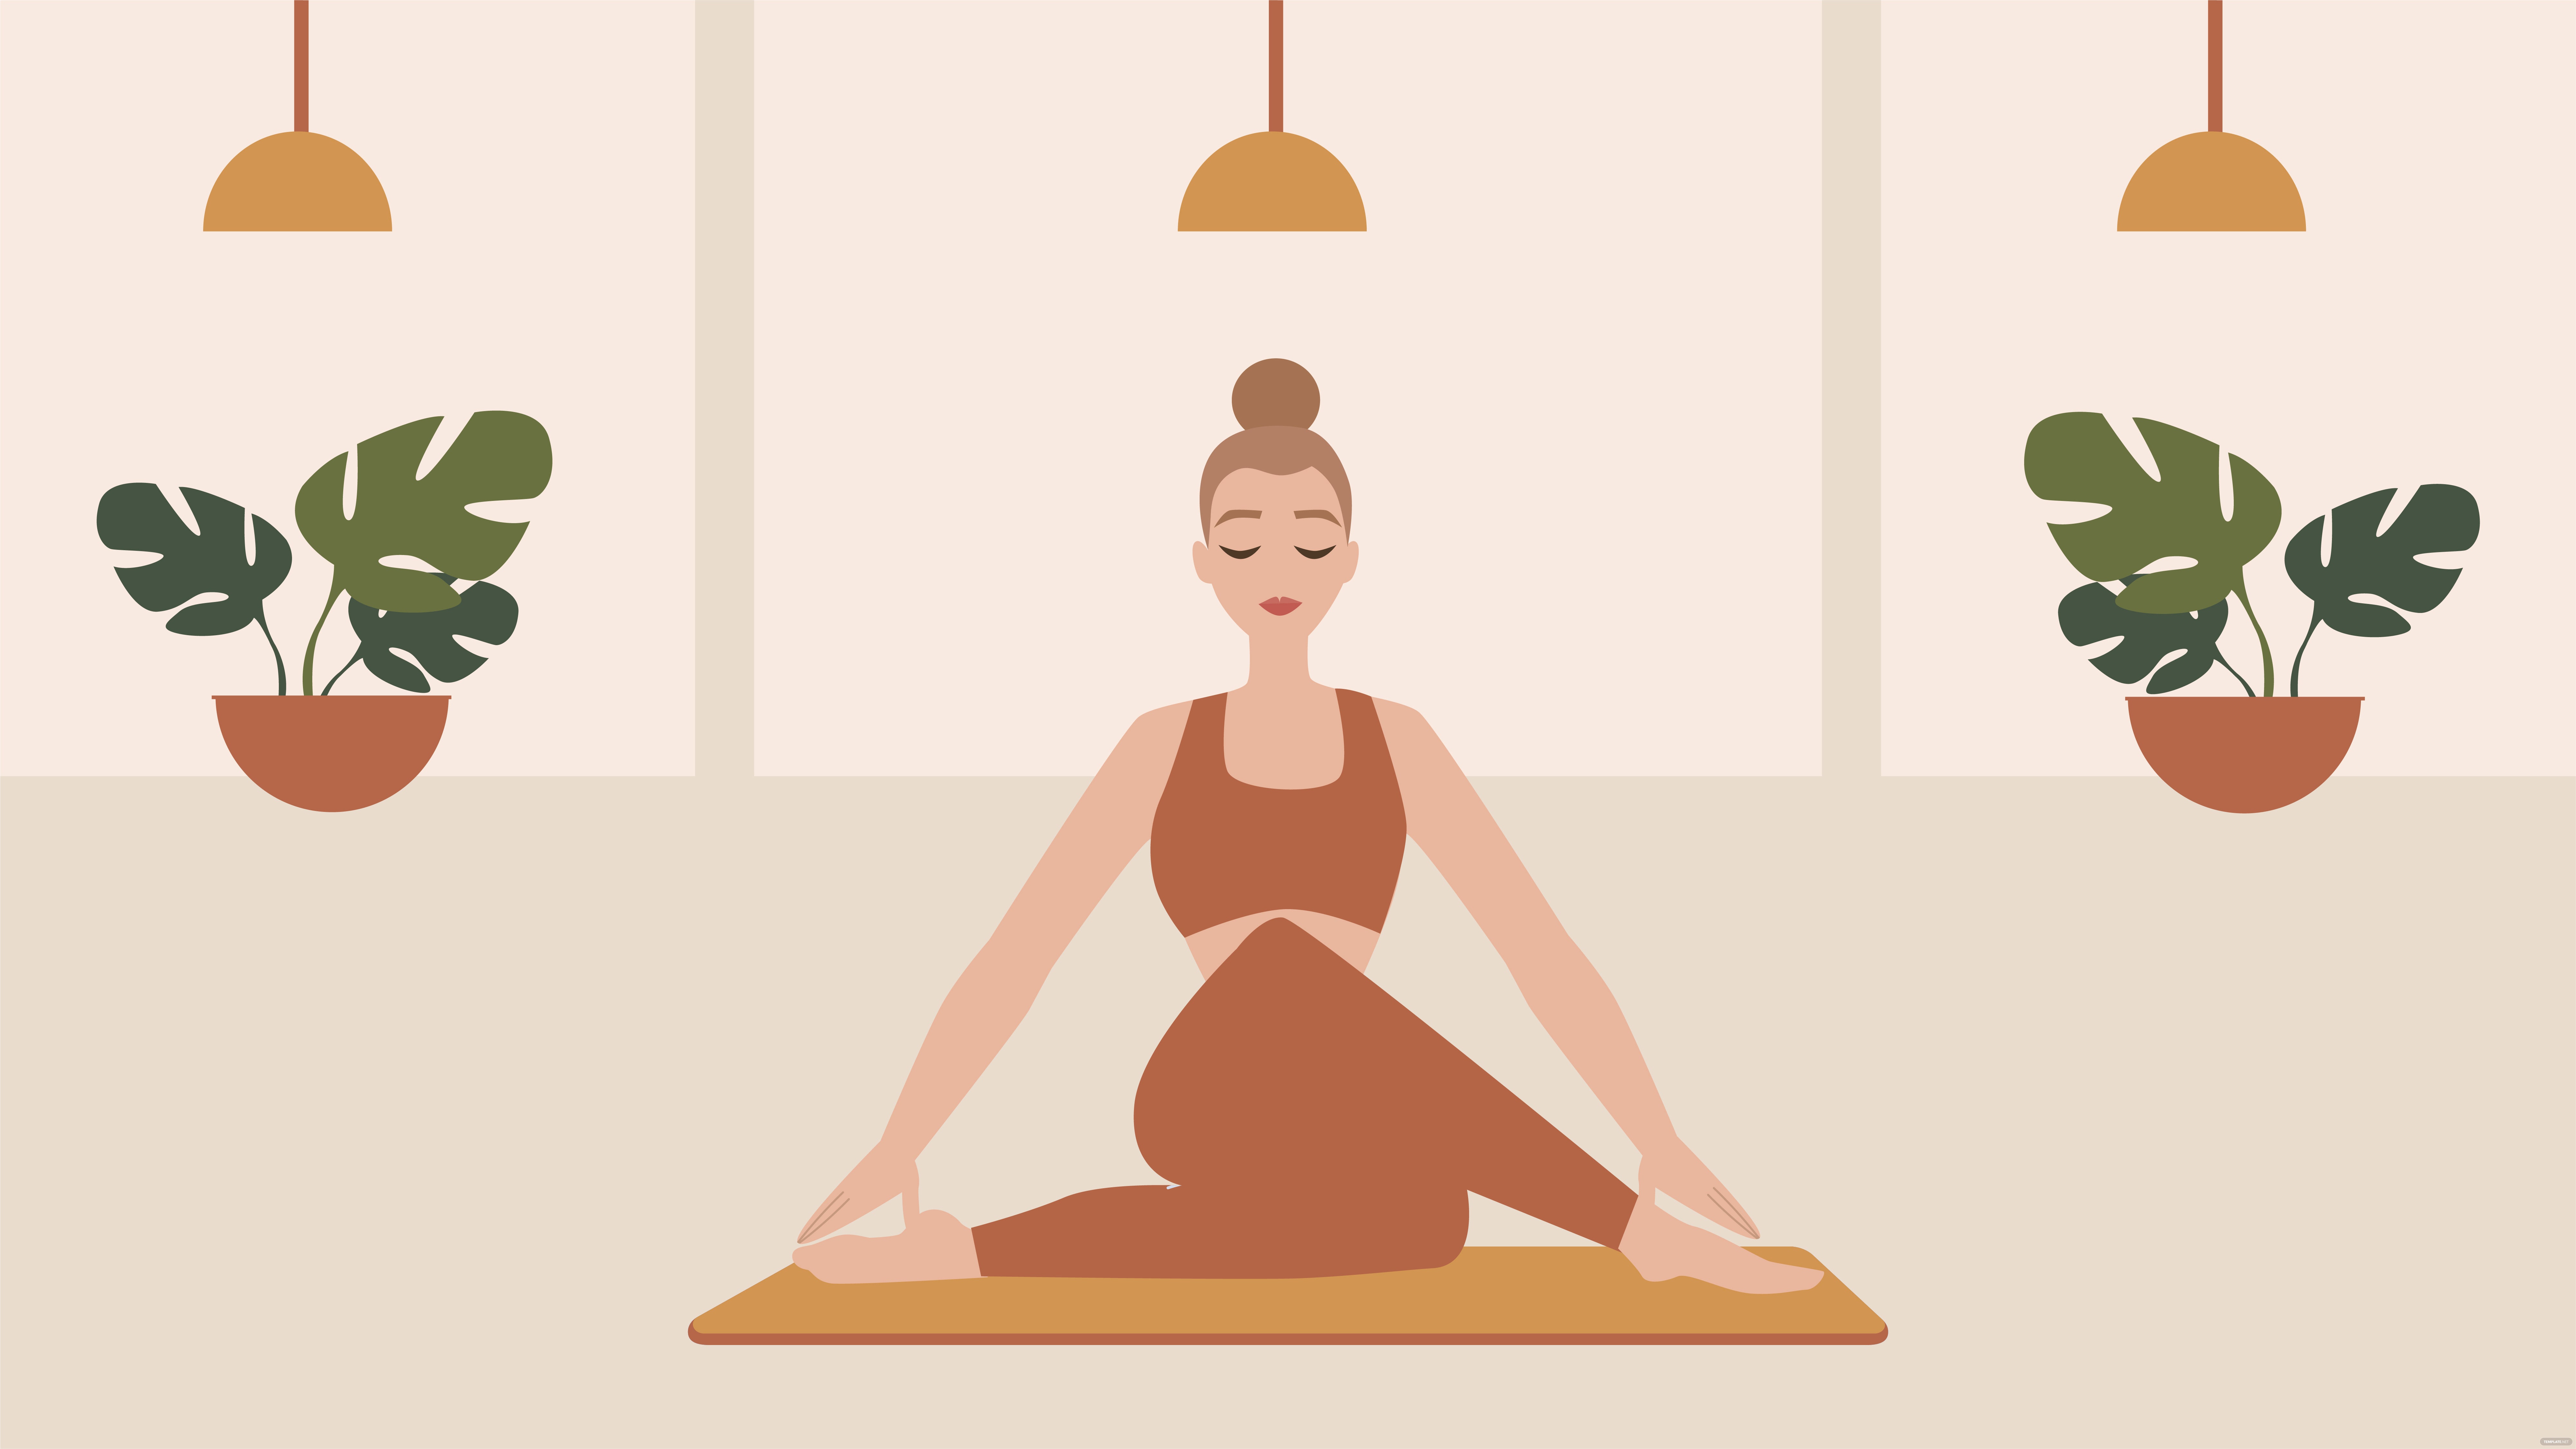 aesthetic international yoga day wallpaper ideas and examples